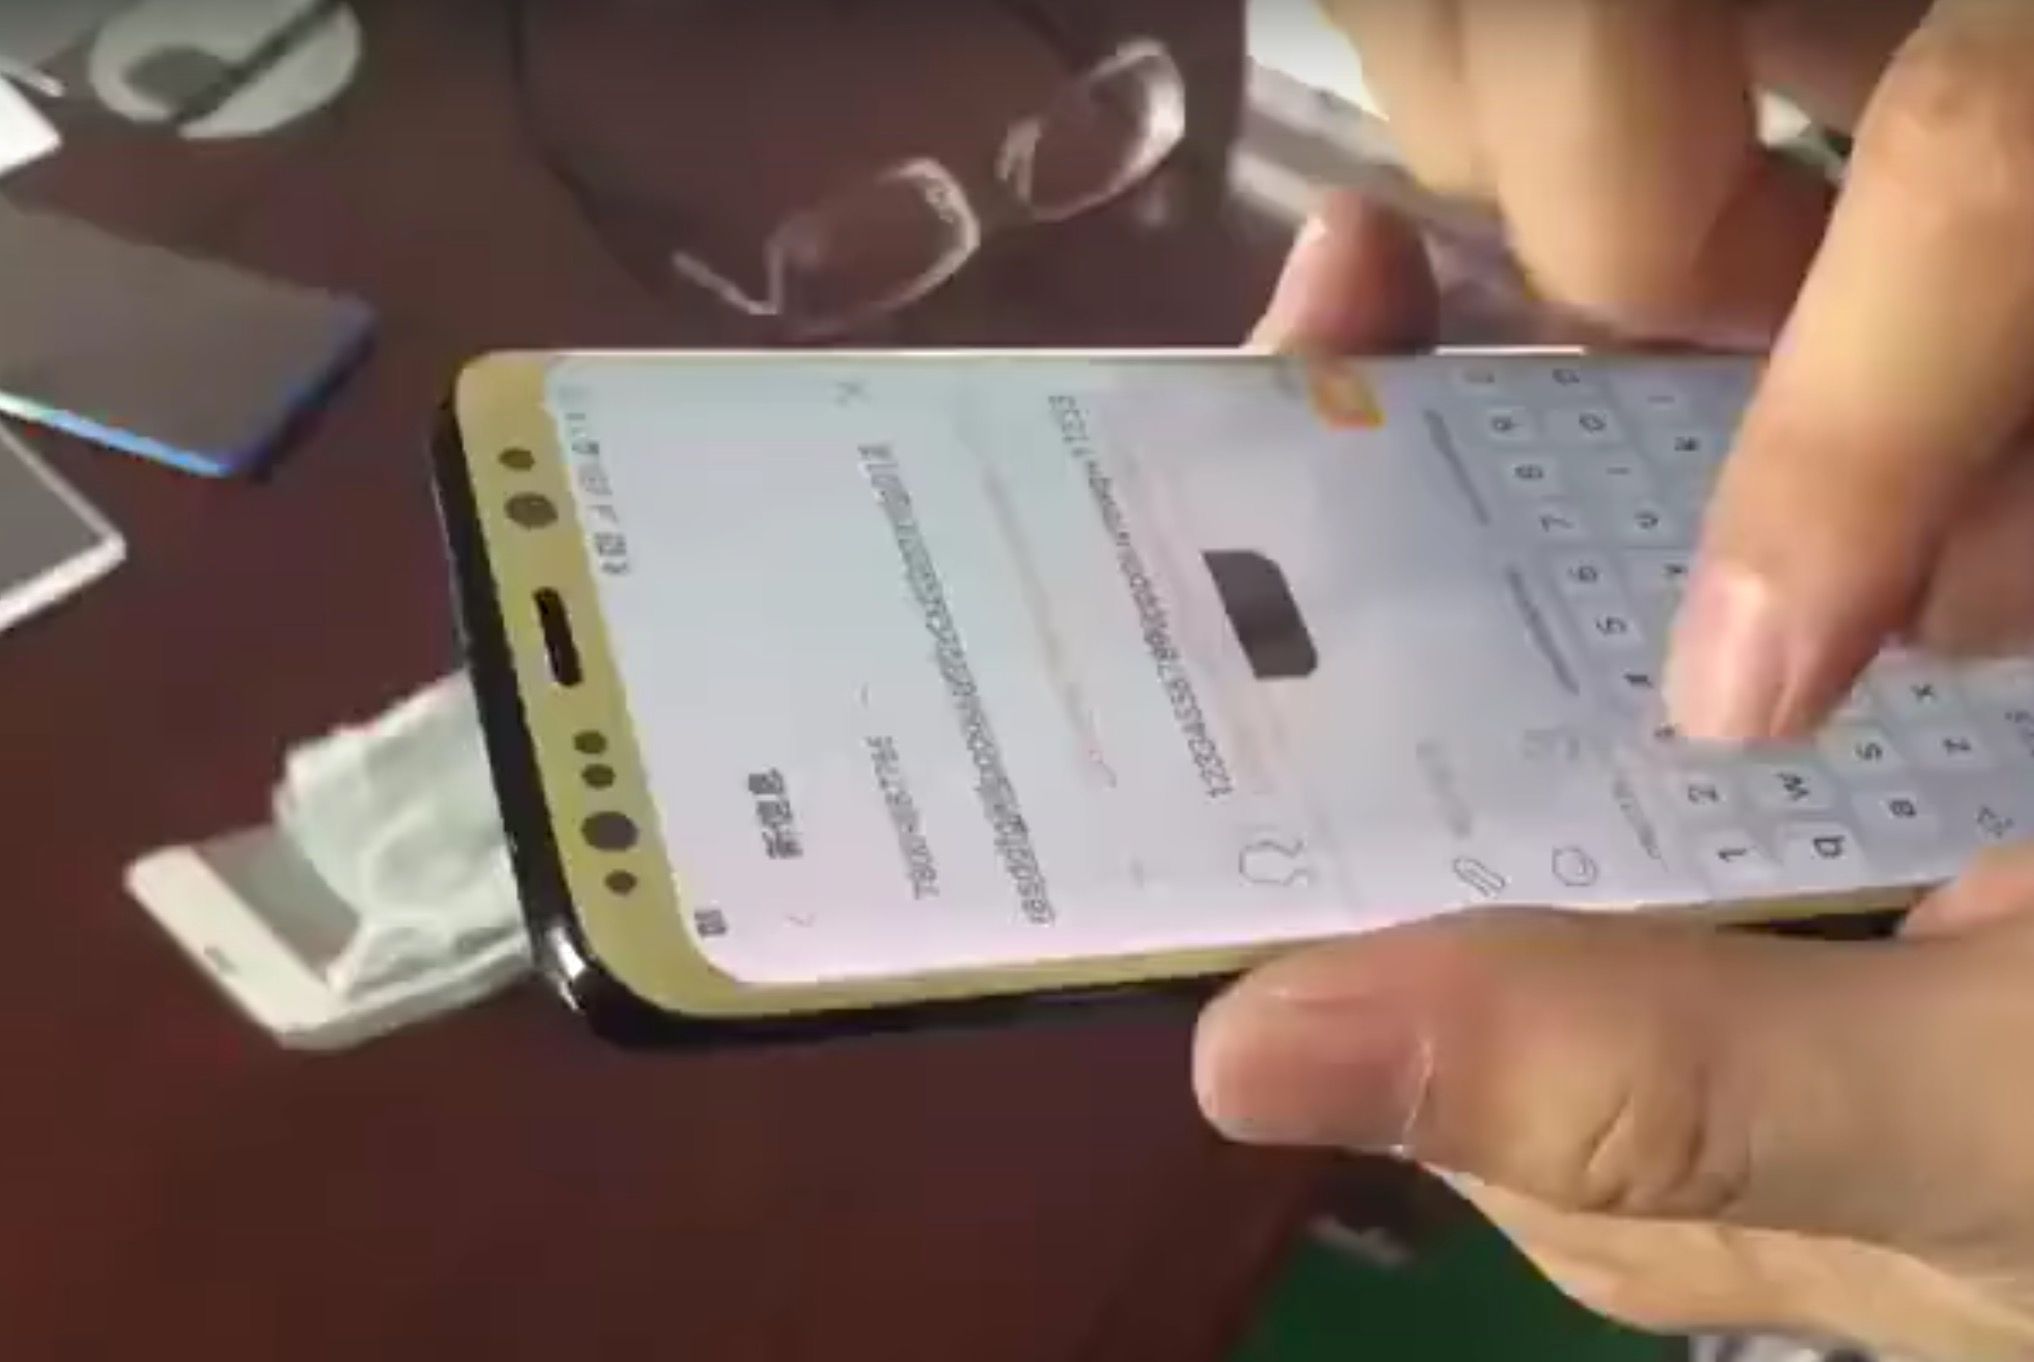 latest samsung galaxy s8 leak is a video of someone typing really fast image 1